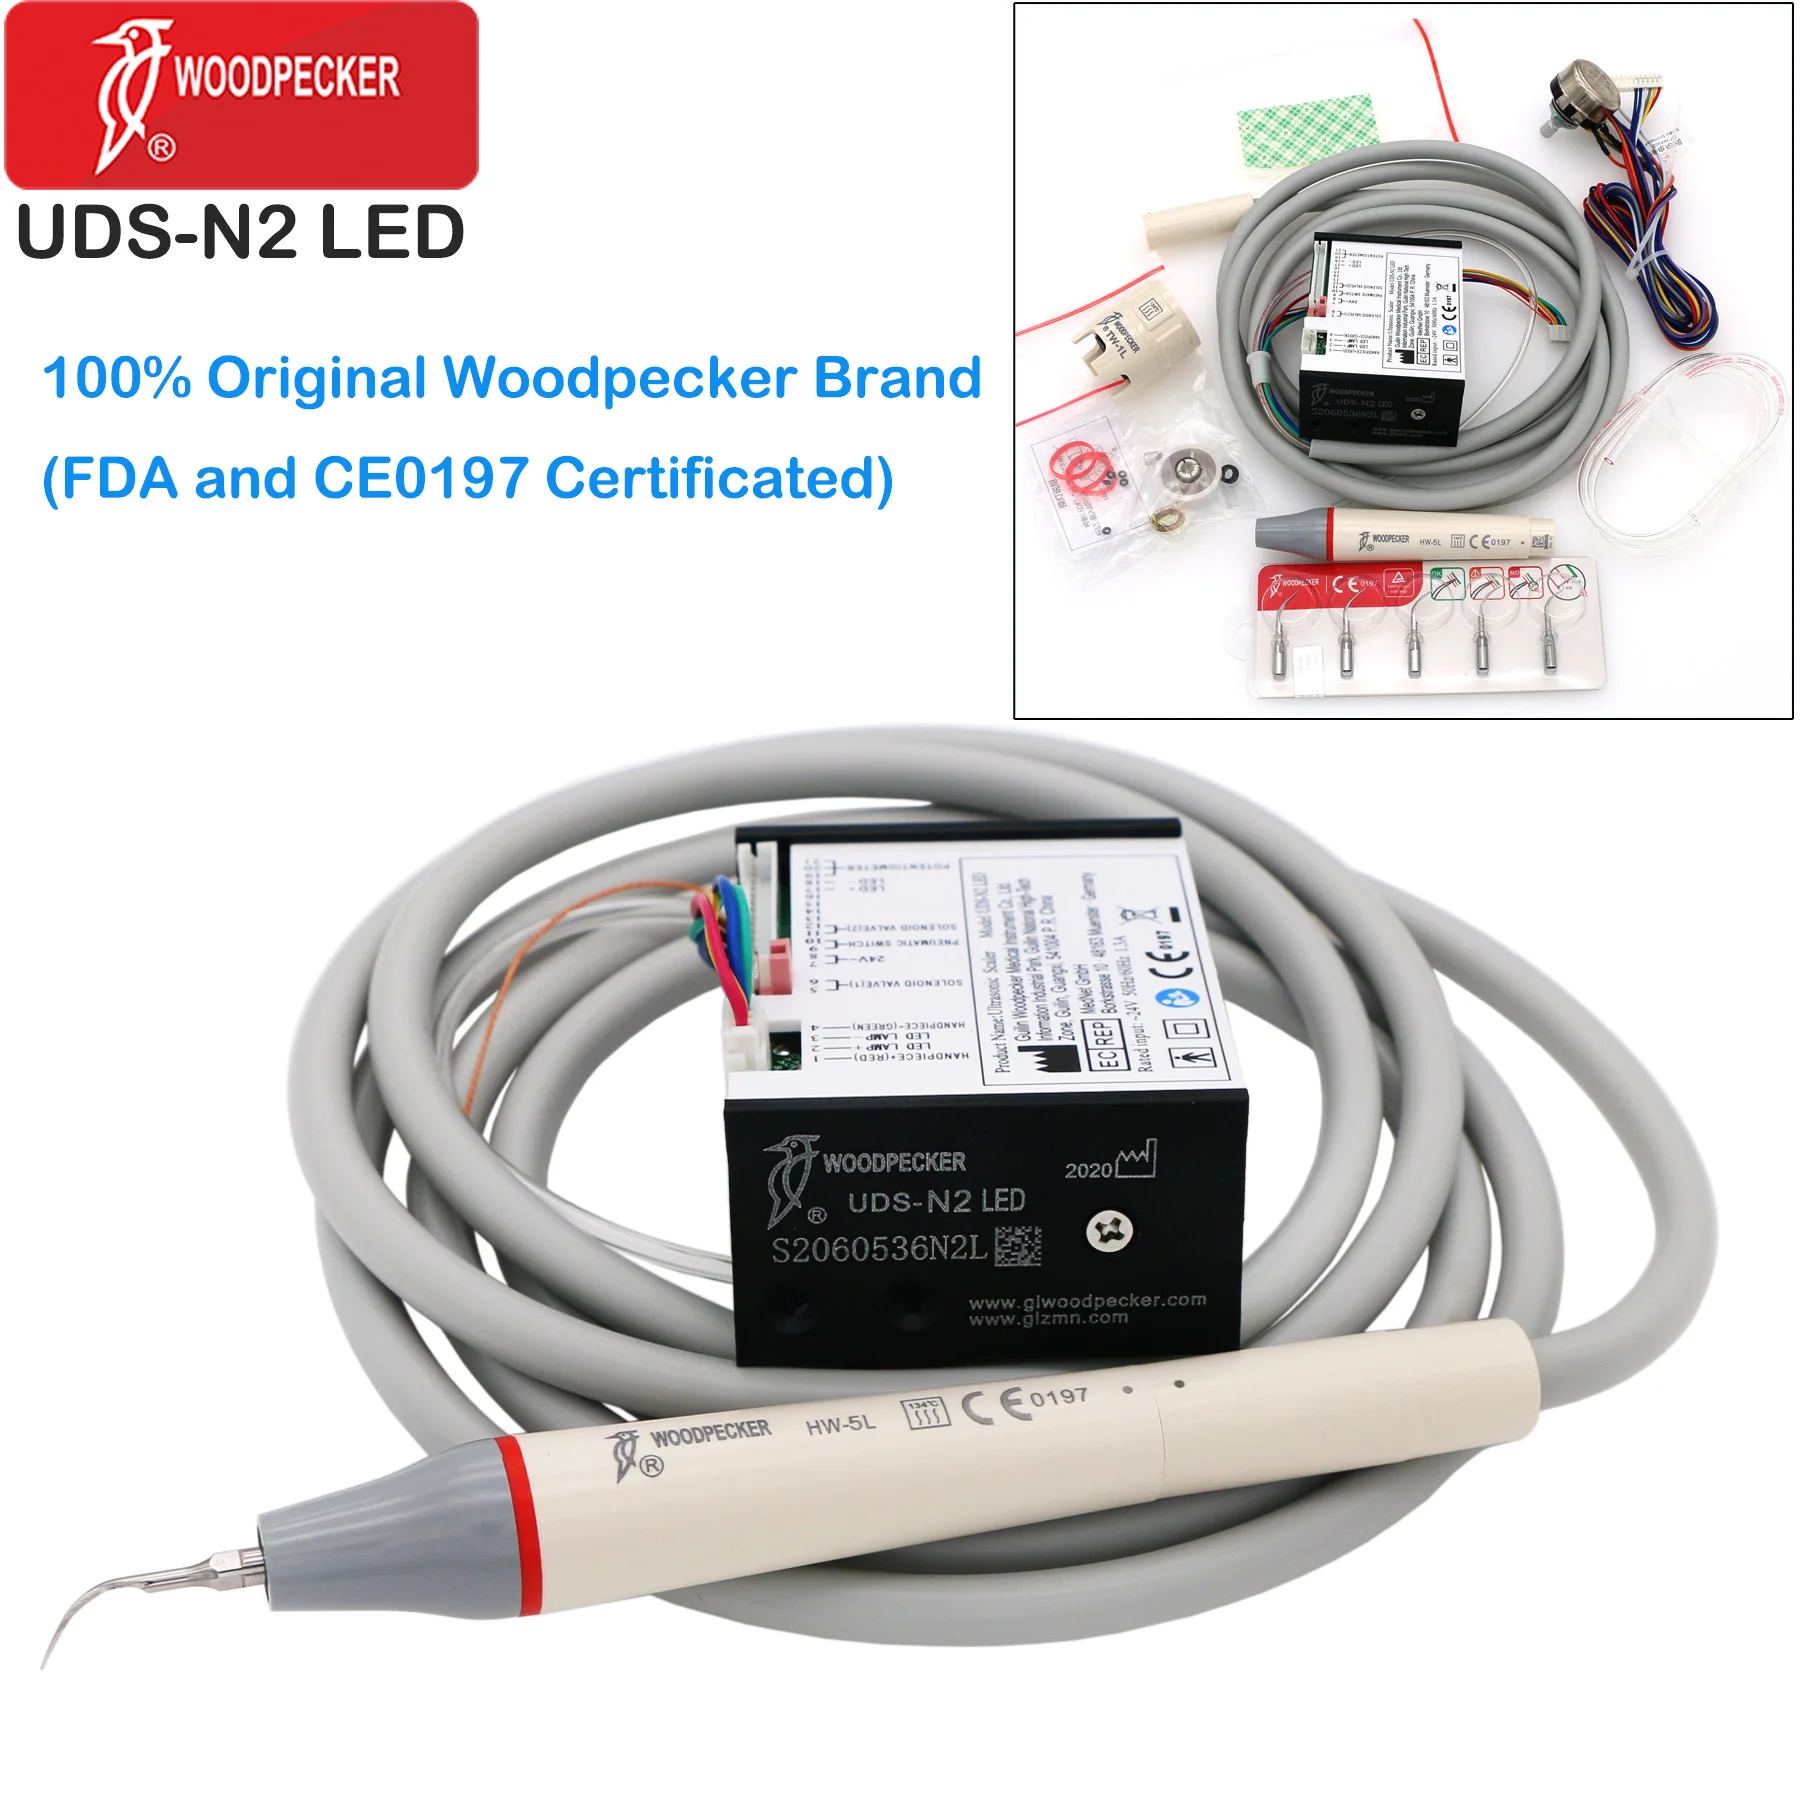 

Woodpecker UDS-N2 LED Ultrasonic Piezo Scaler Built In for Dental Chair Scaler N3-LED Handpiece Cable Tubes